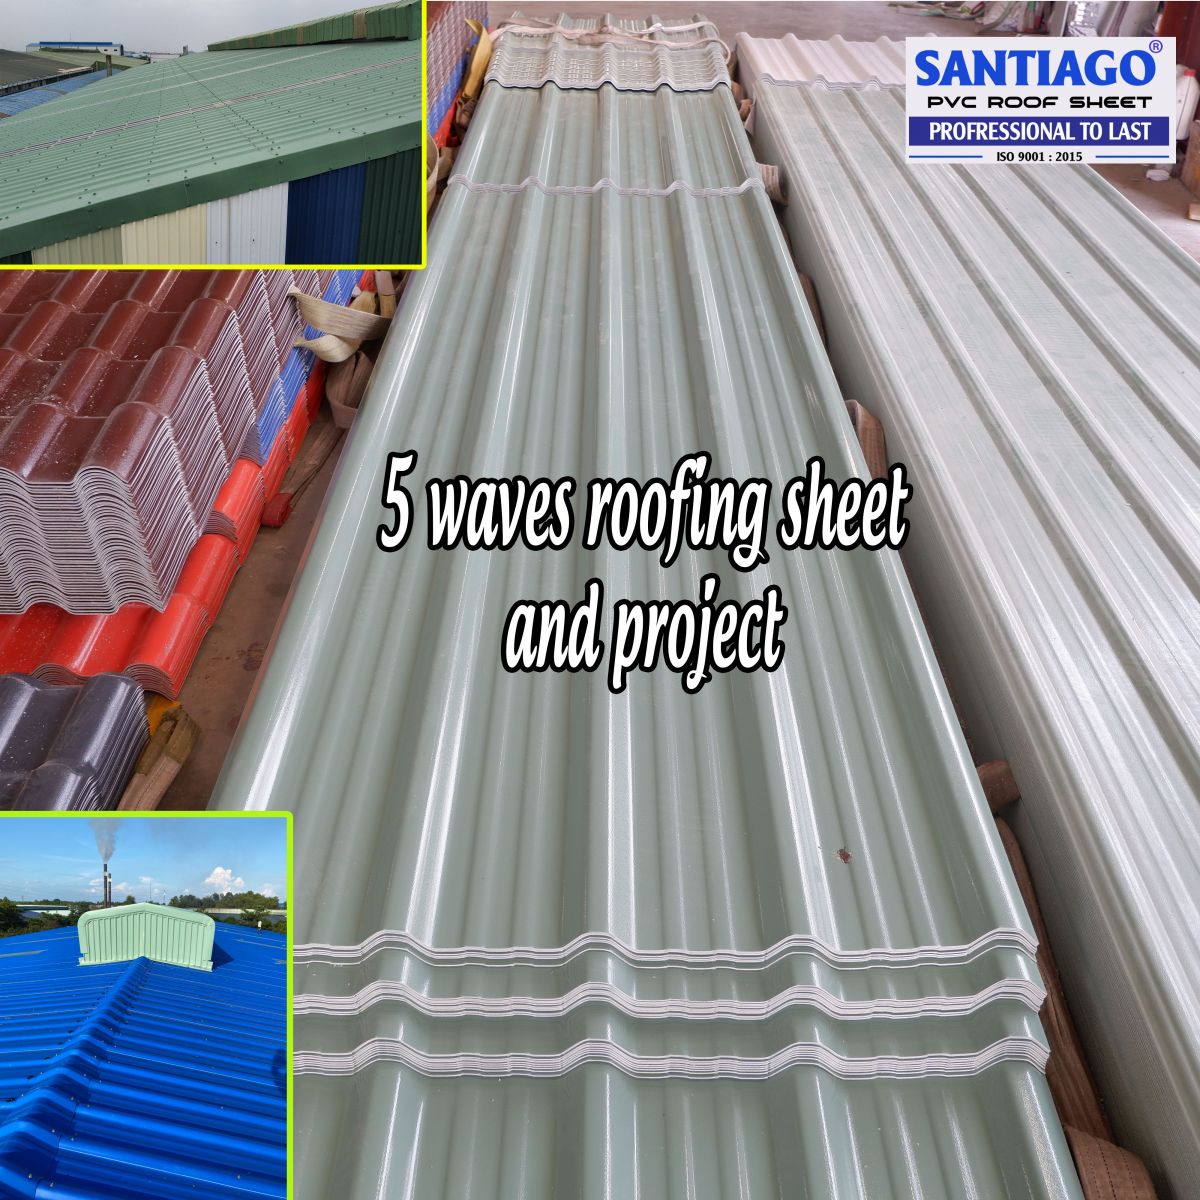 5 wave asa pvc roofing sheets and prohect